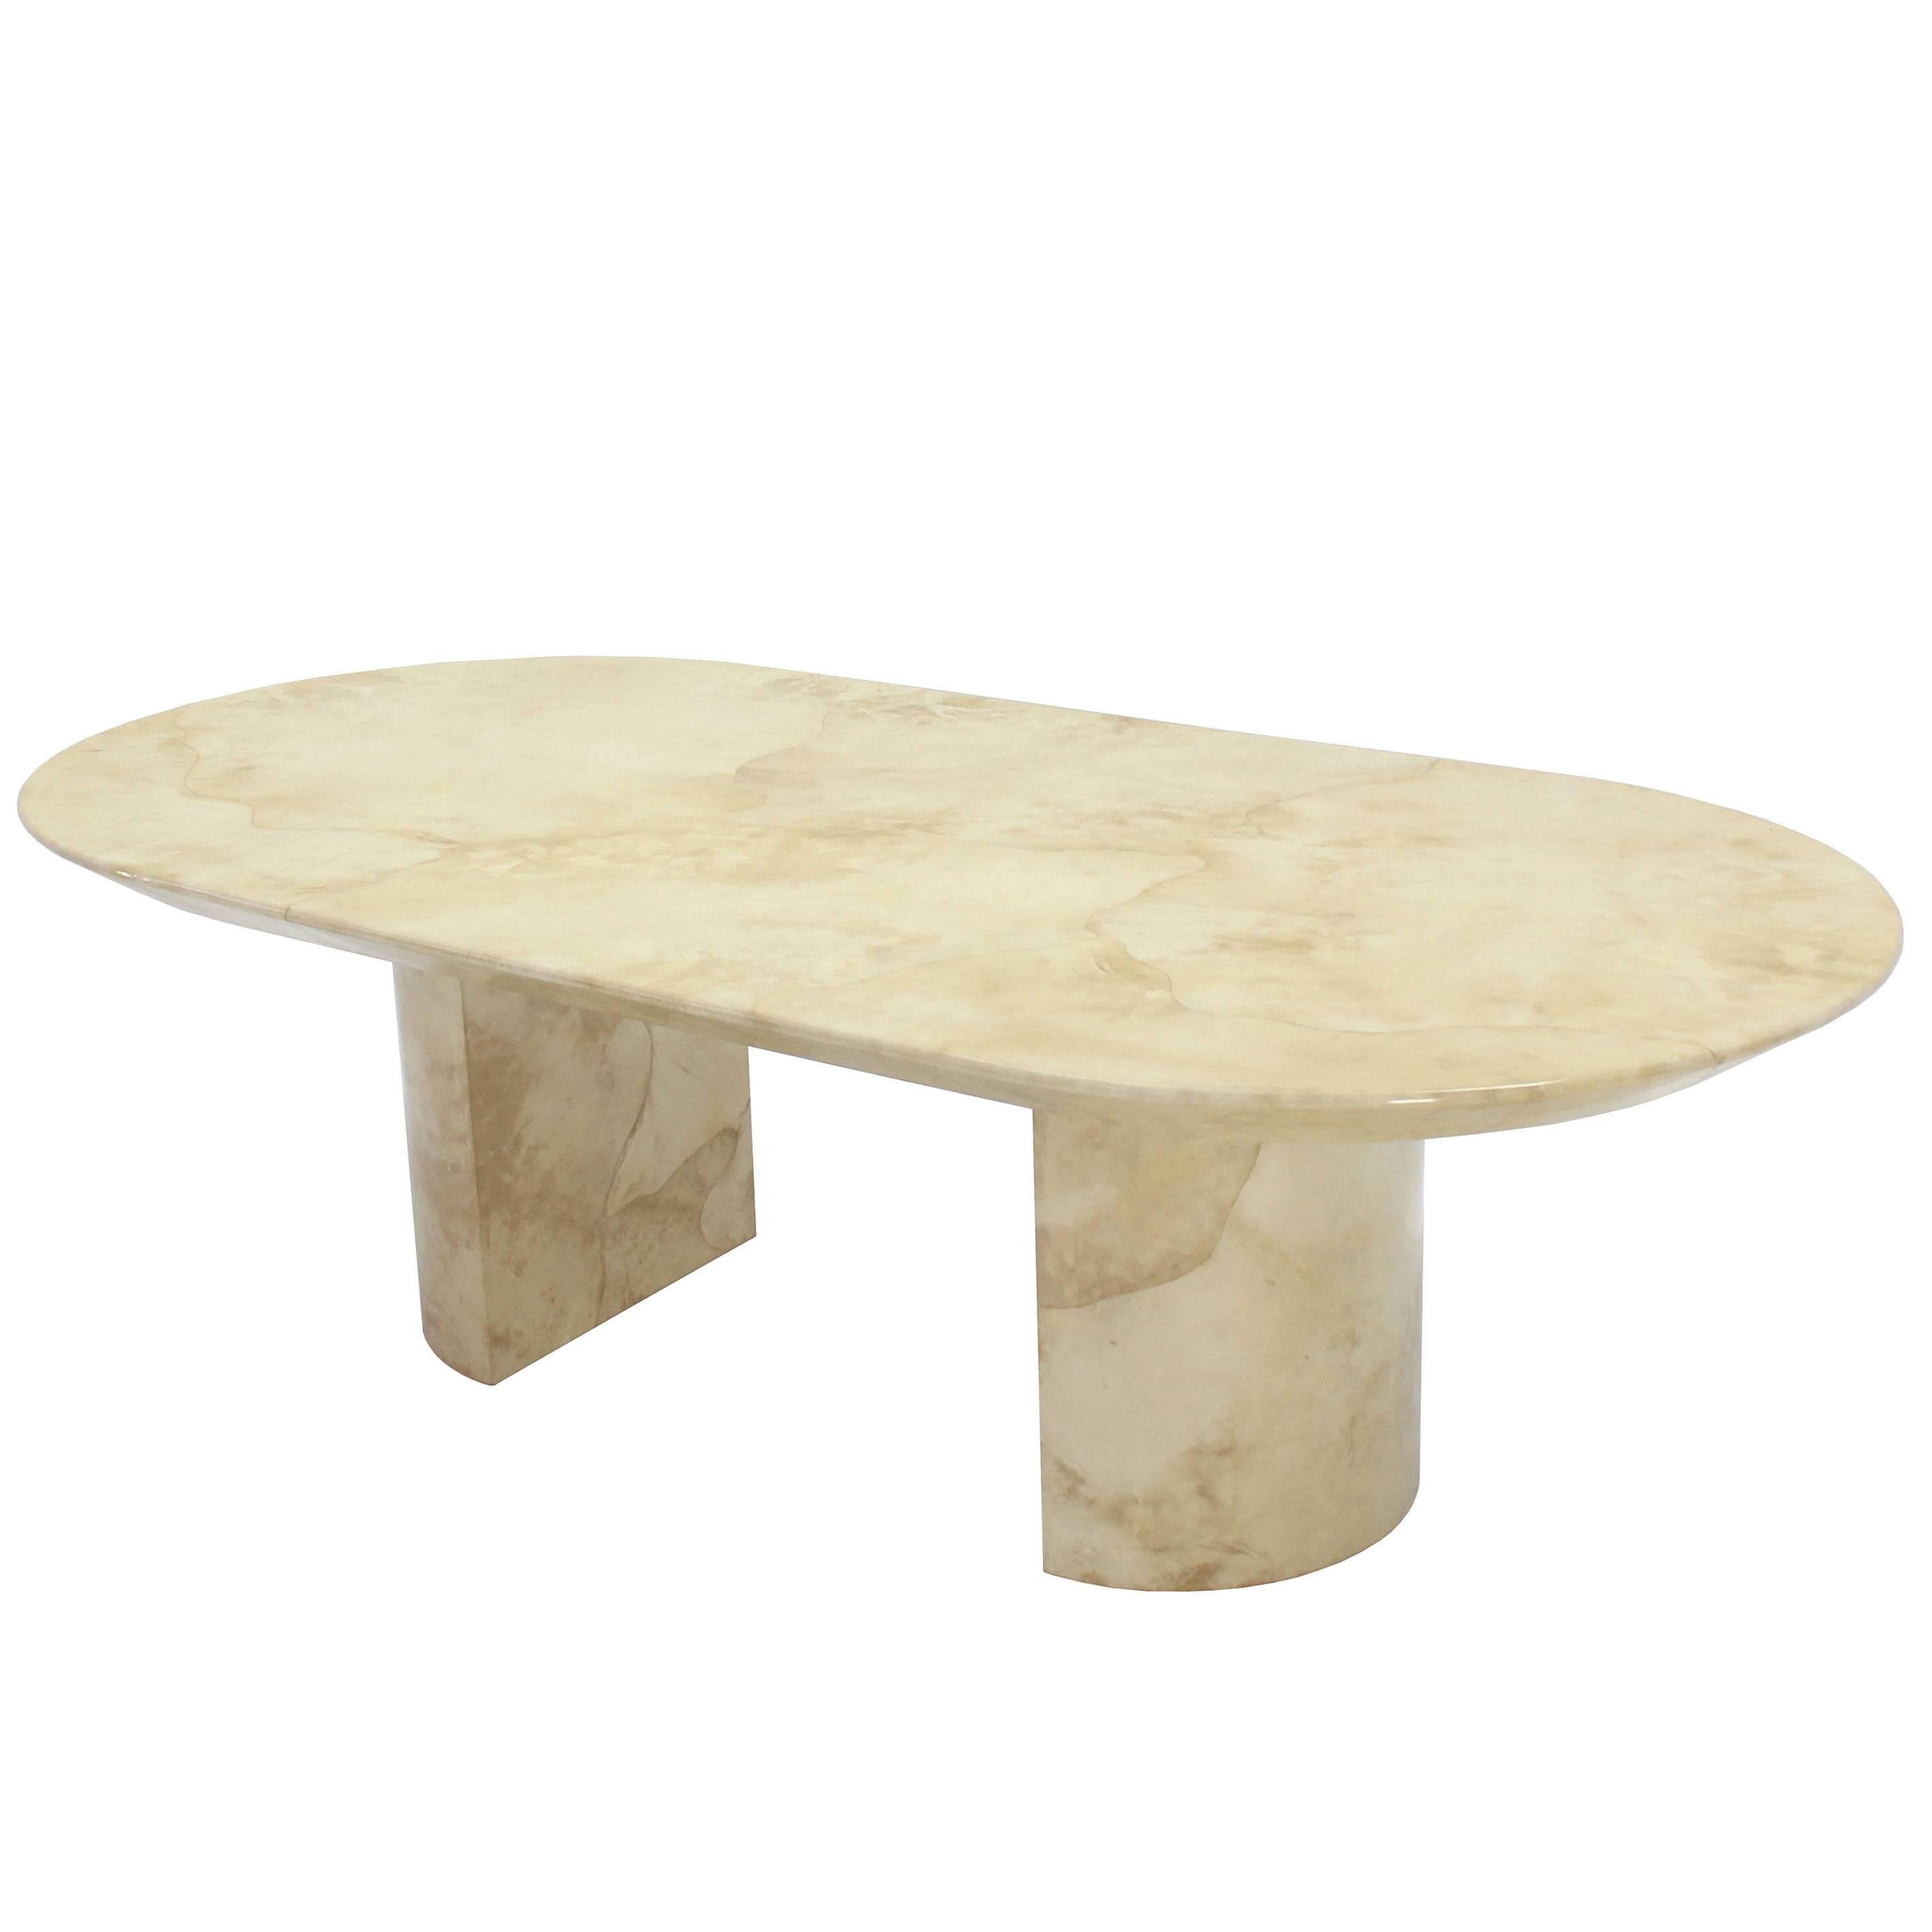 Goatskin Parchment Two Pedestal Oval Dining Table